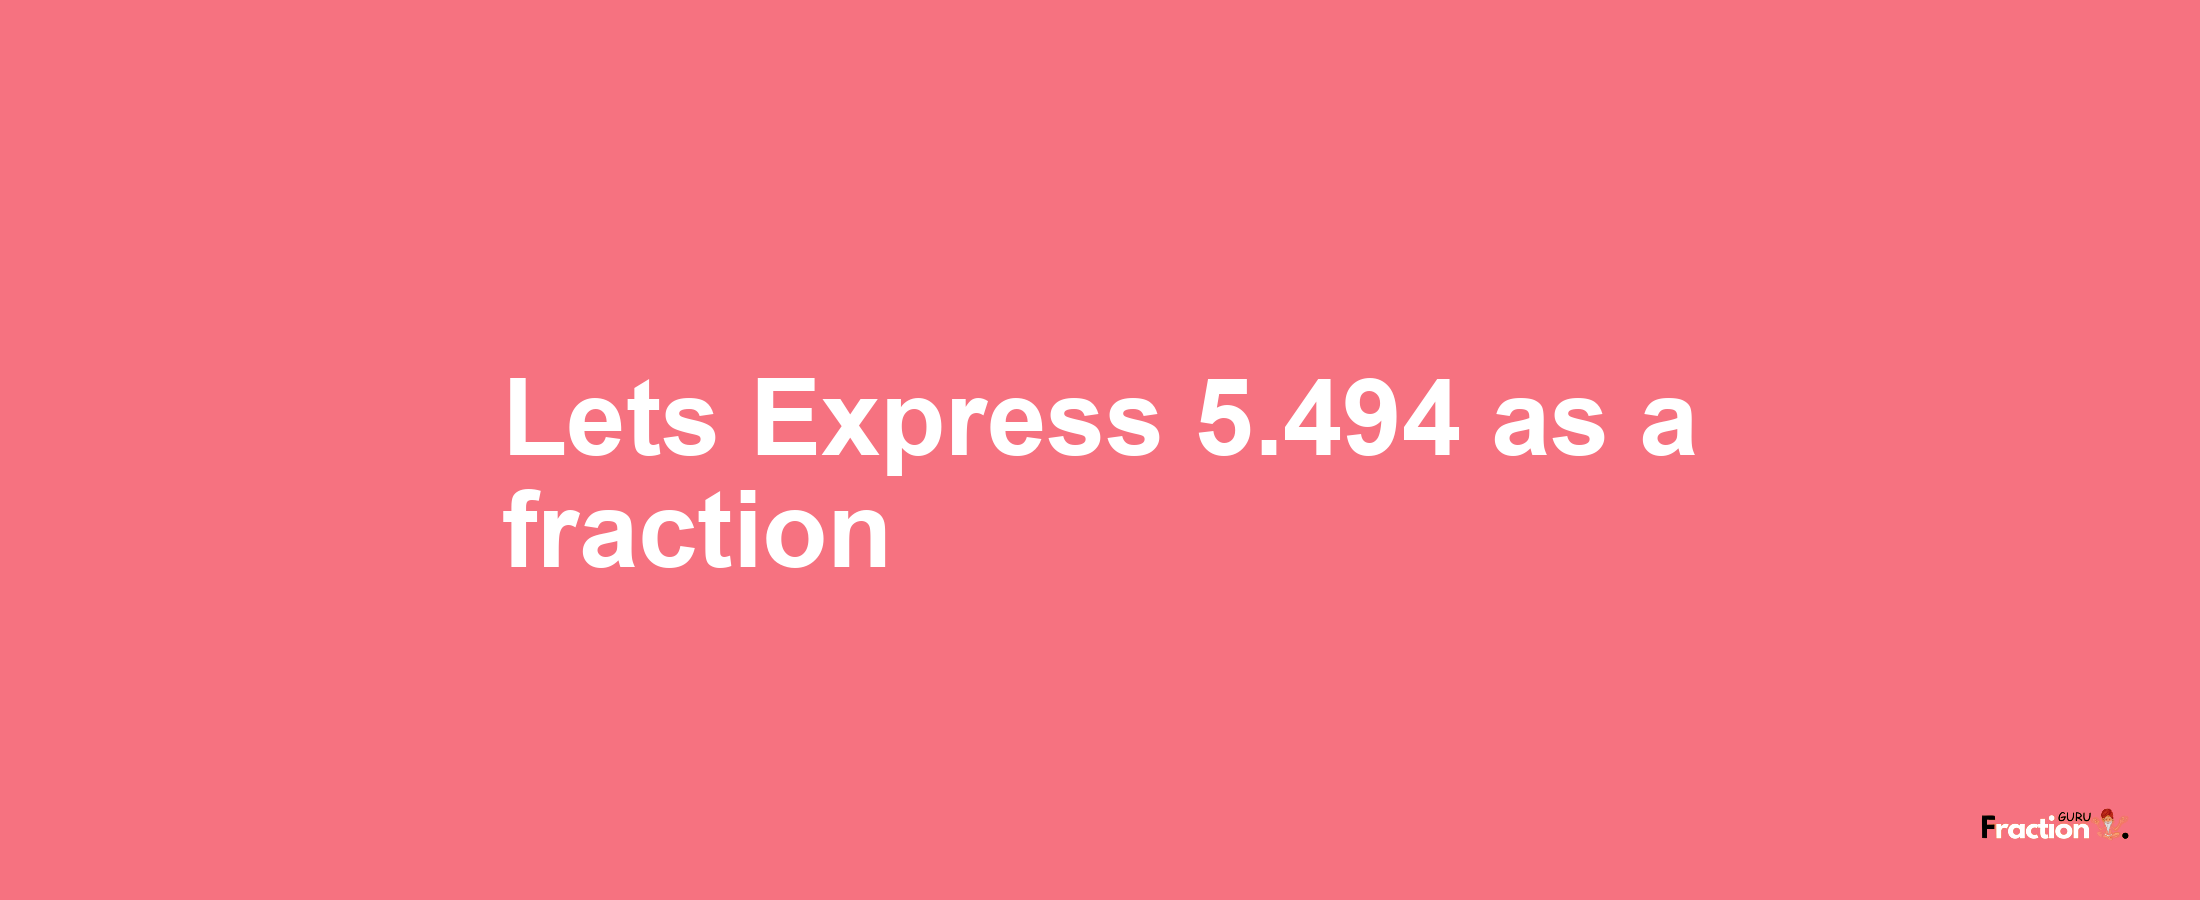 Lets Express 5.494 as afraction